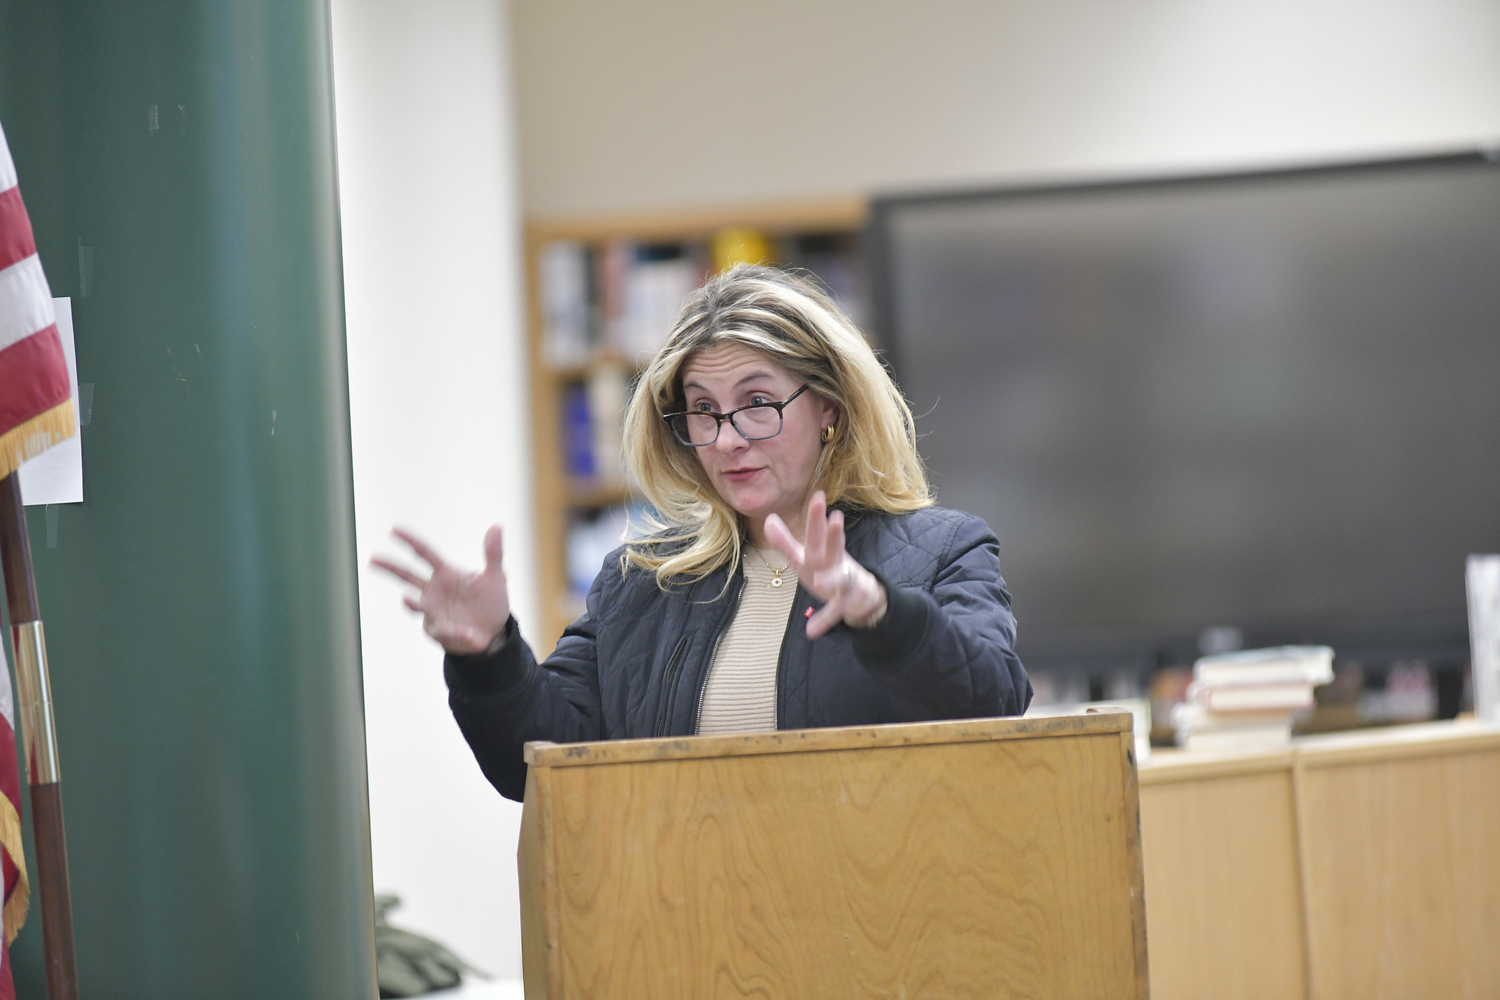 Jen Neumaier makes a point at Monday night's board of education meeting.  DANA SHAW